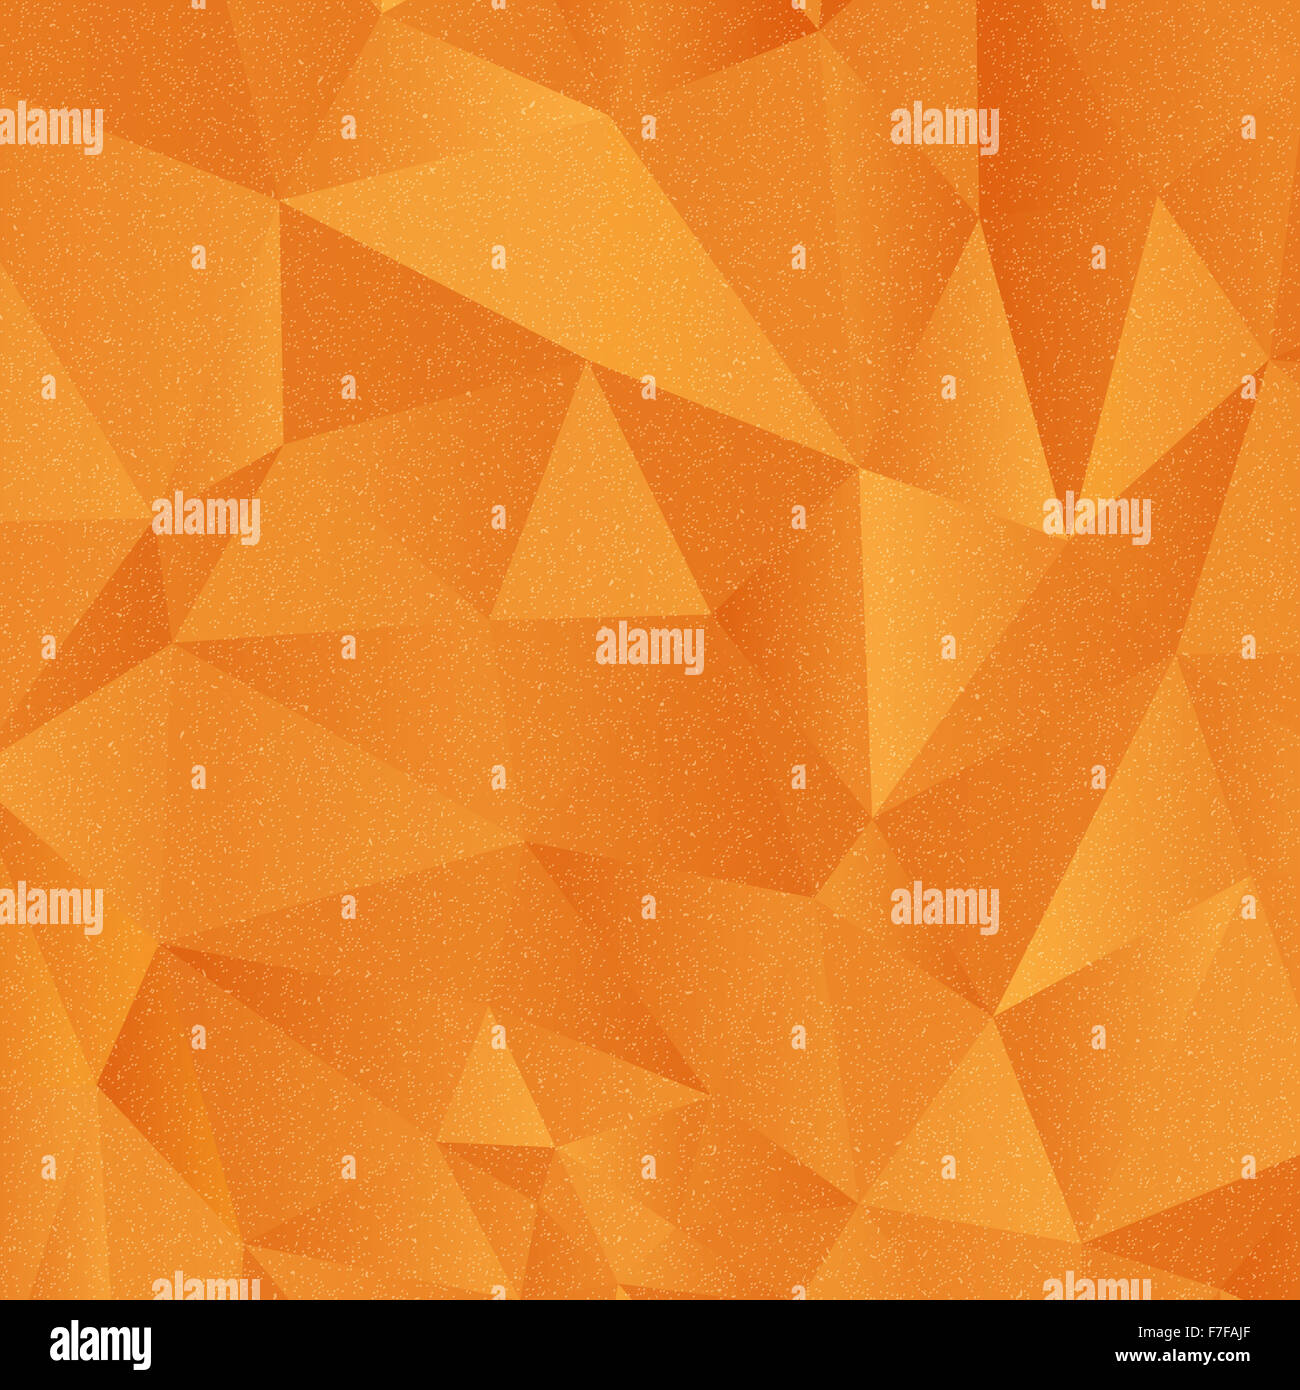 Grunge style low poly design background Stock Photo